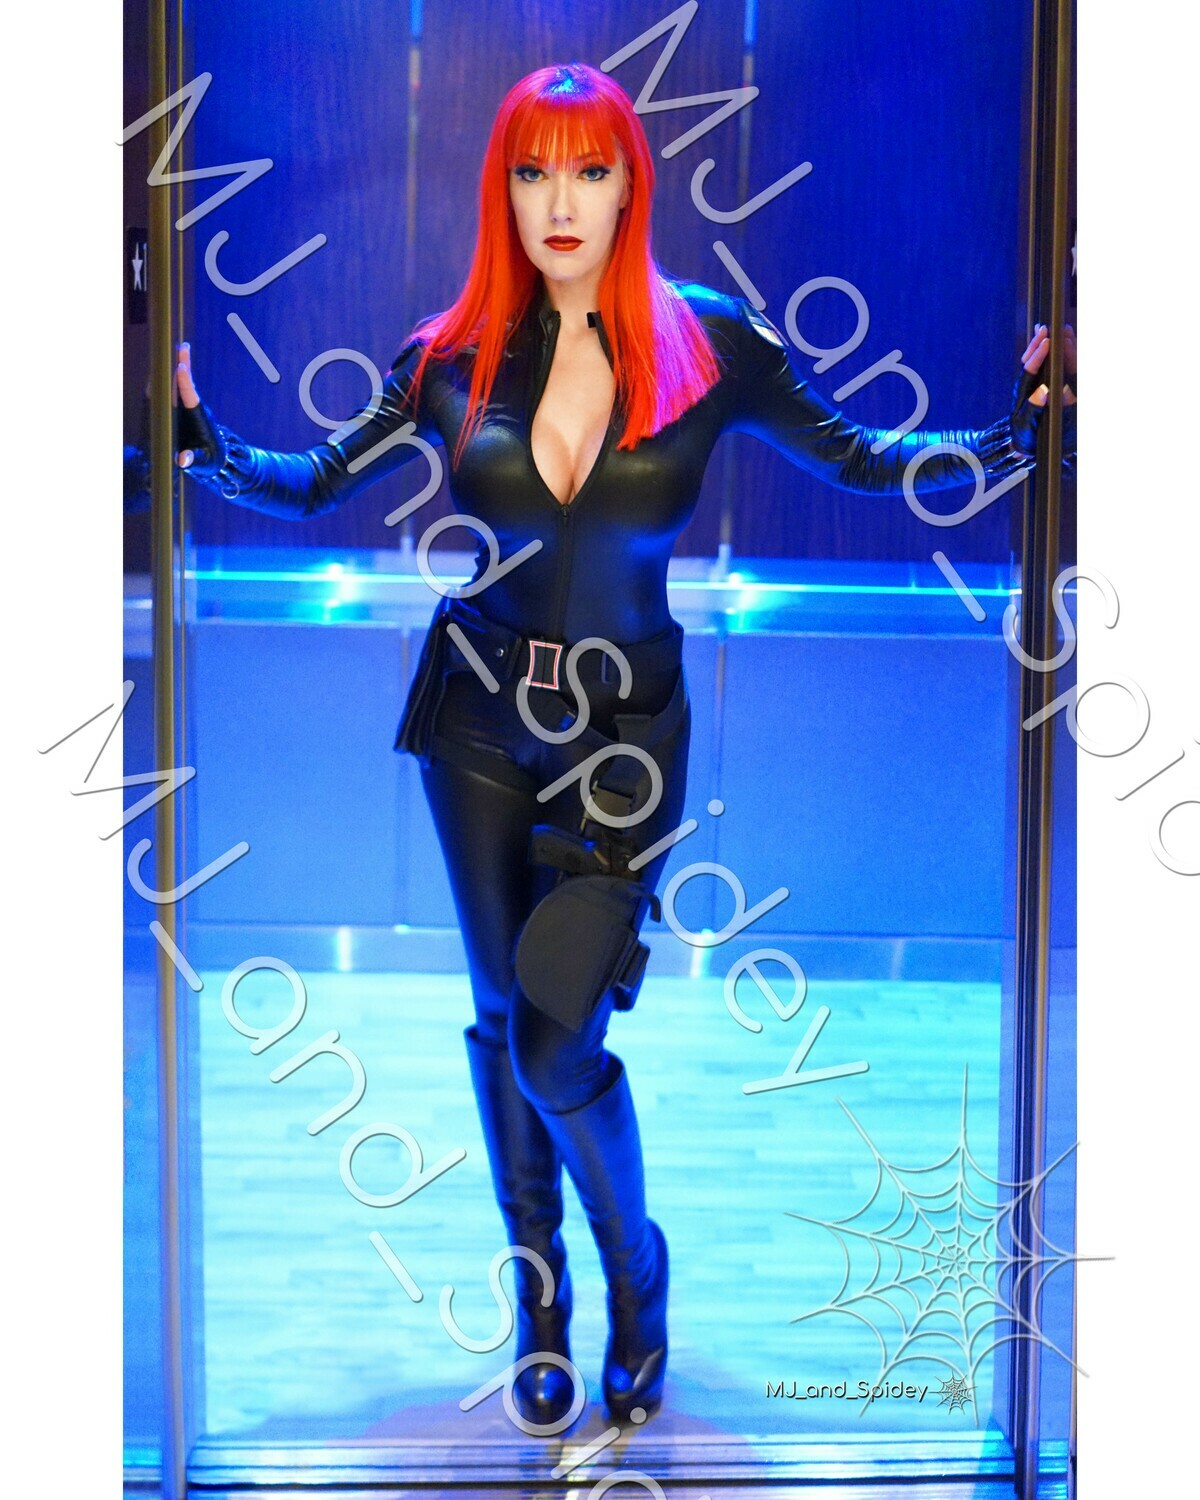 Marvel - Avengers - Black Widow No. 3 - 8x10 Cosplay Print (@MJ_and_Spidey, MJ and Spidey, Comics)